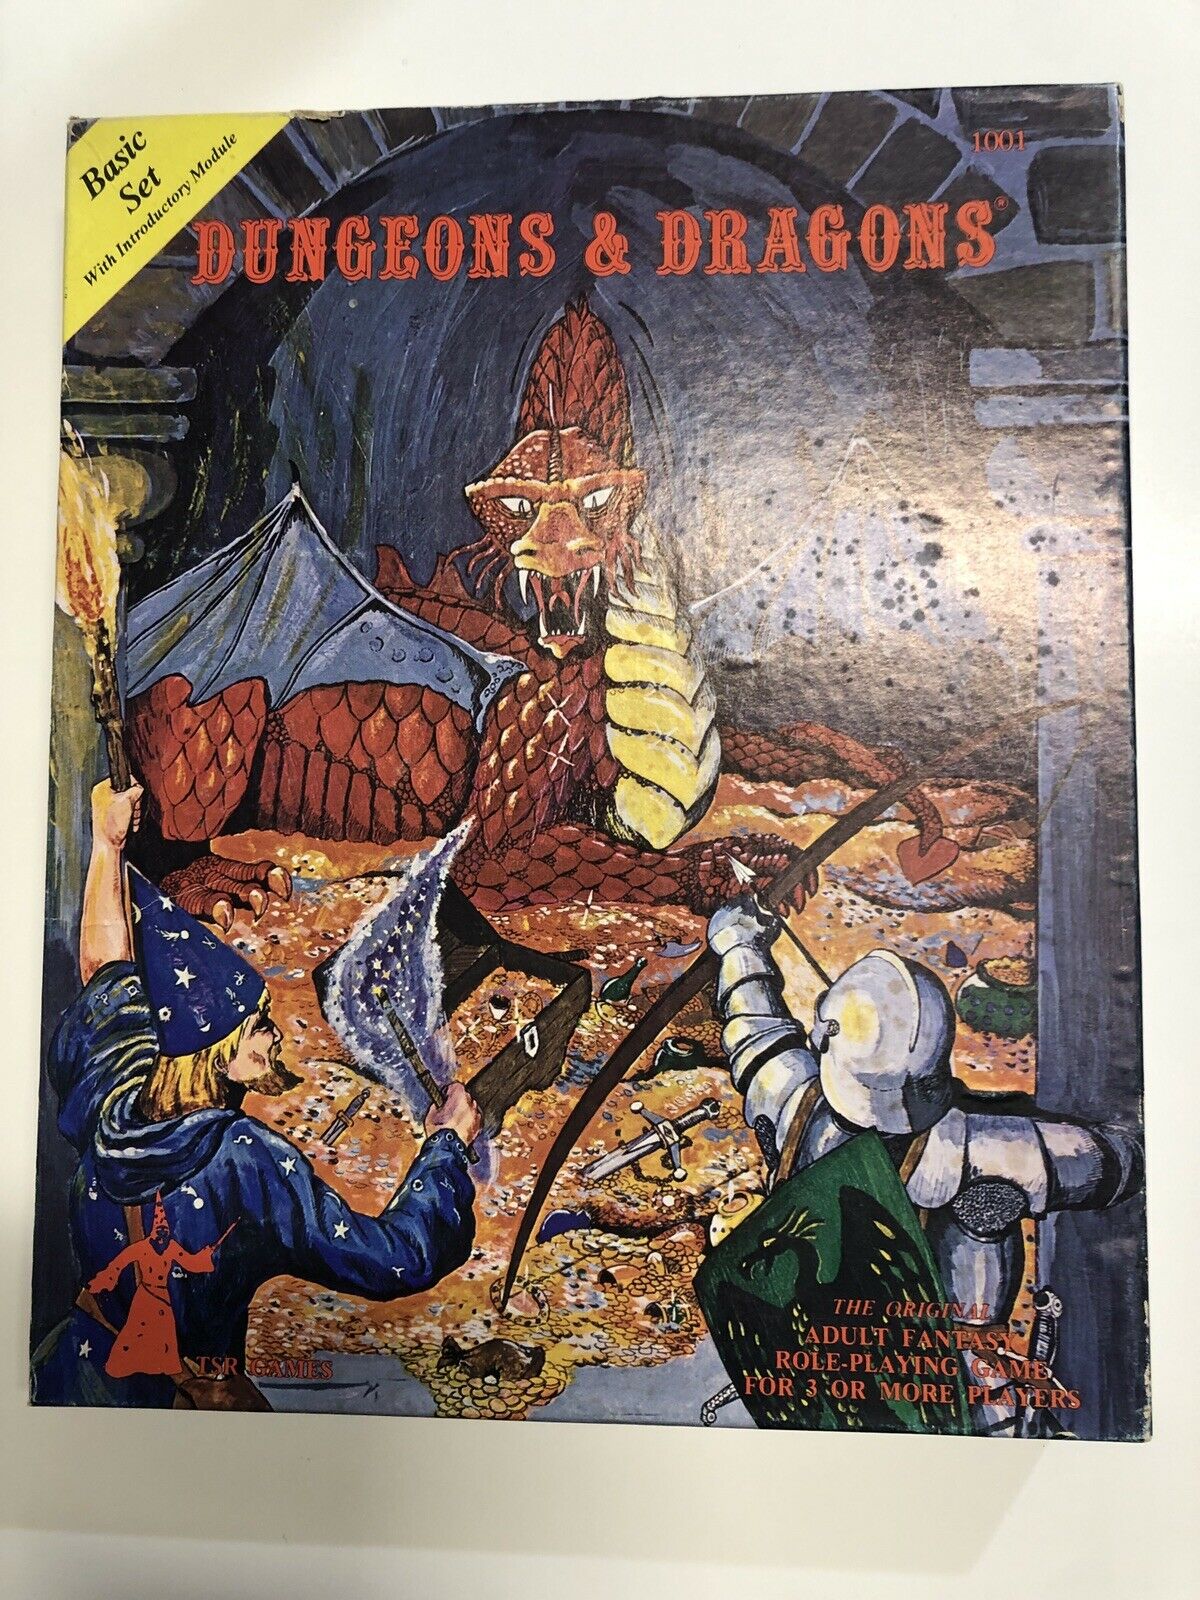 Dungeon And Dragons Original 1979 Basic Set 1001 With Introductory Module